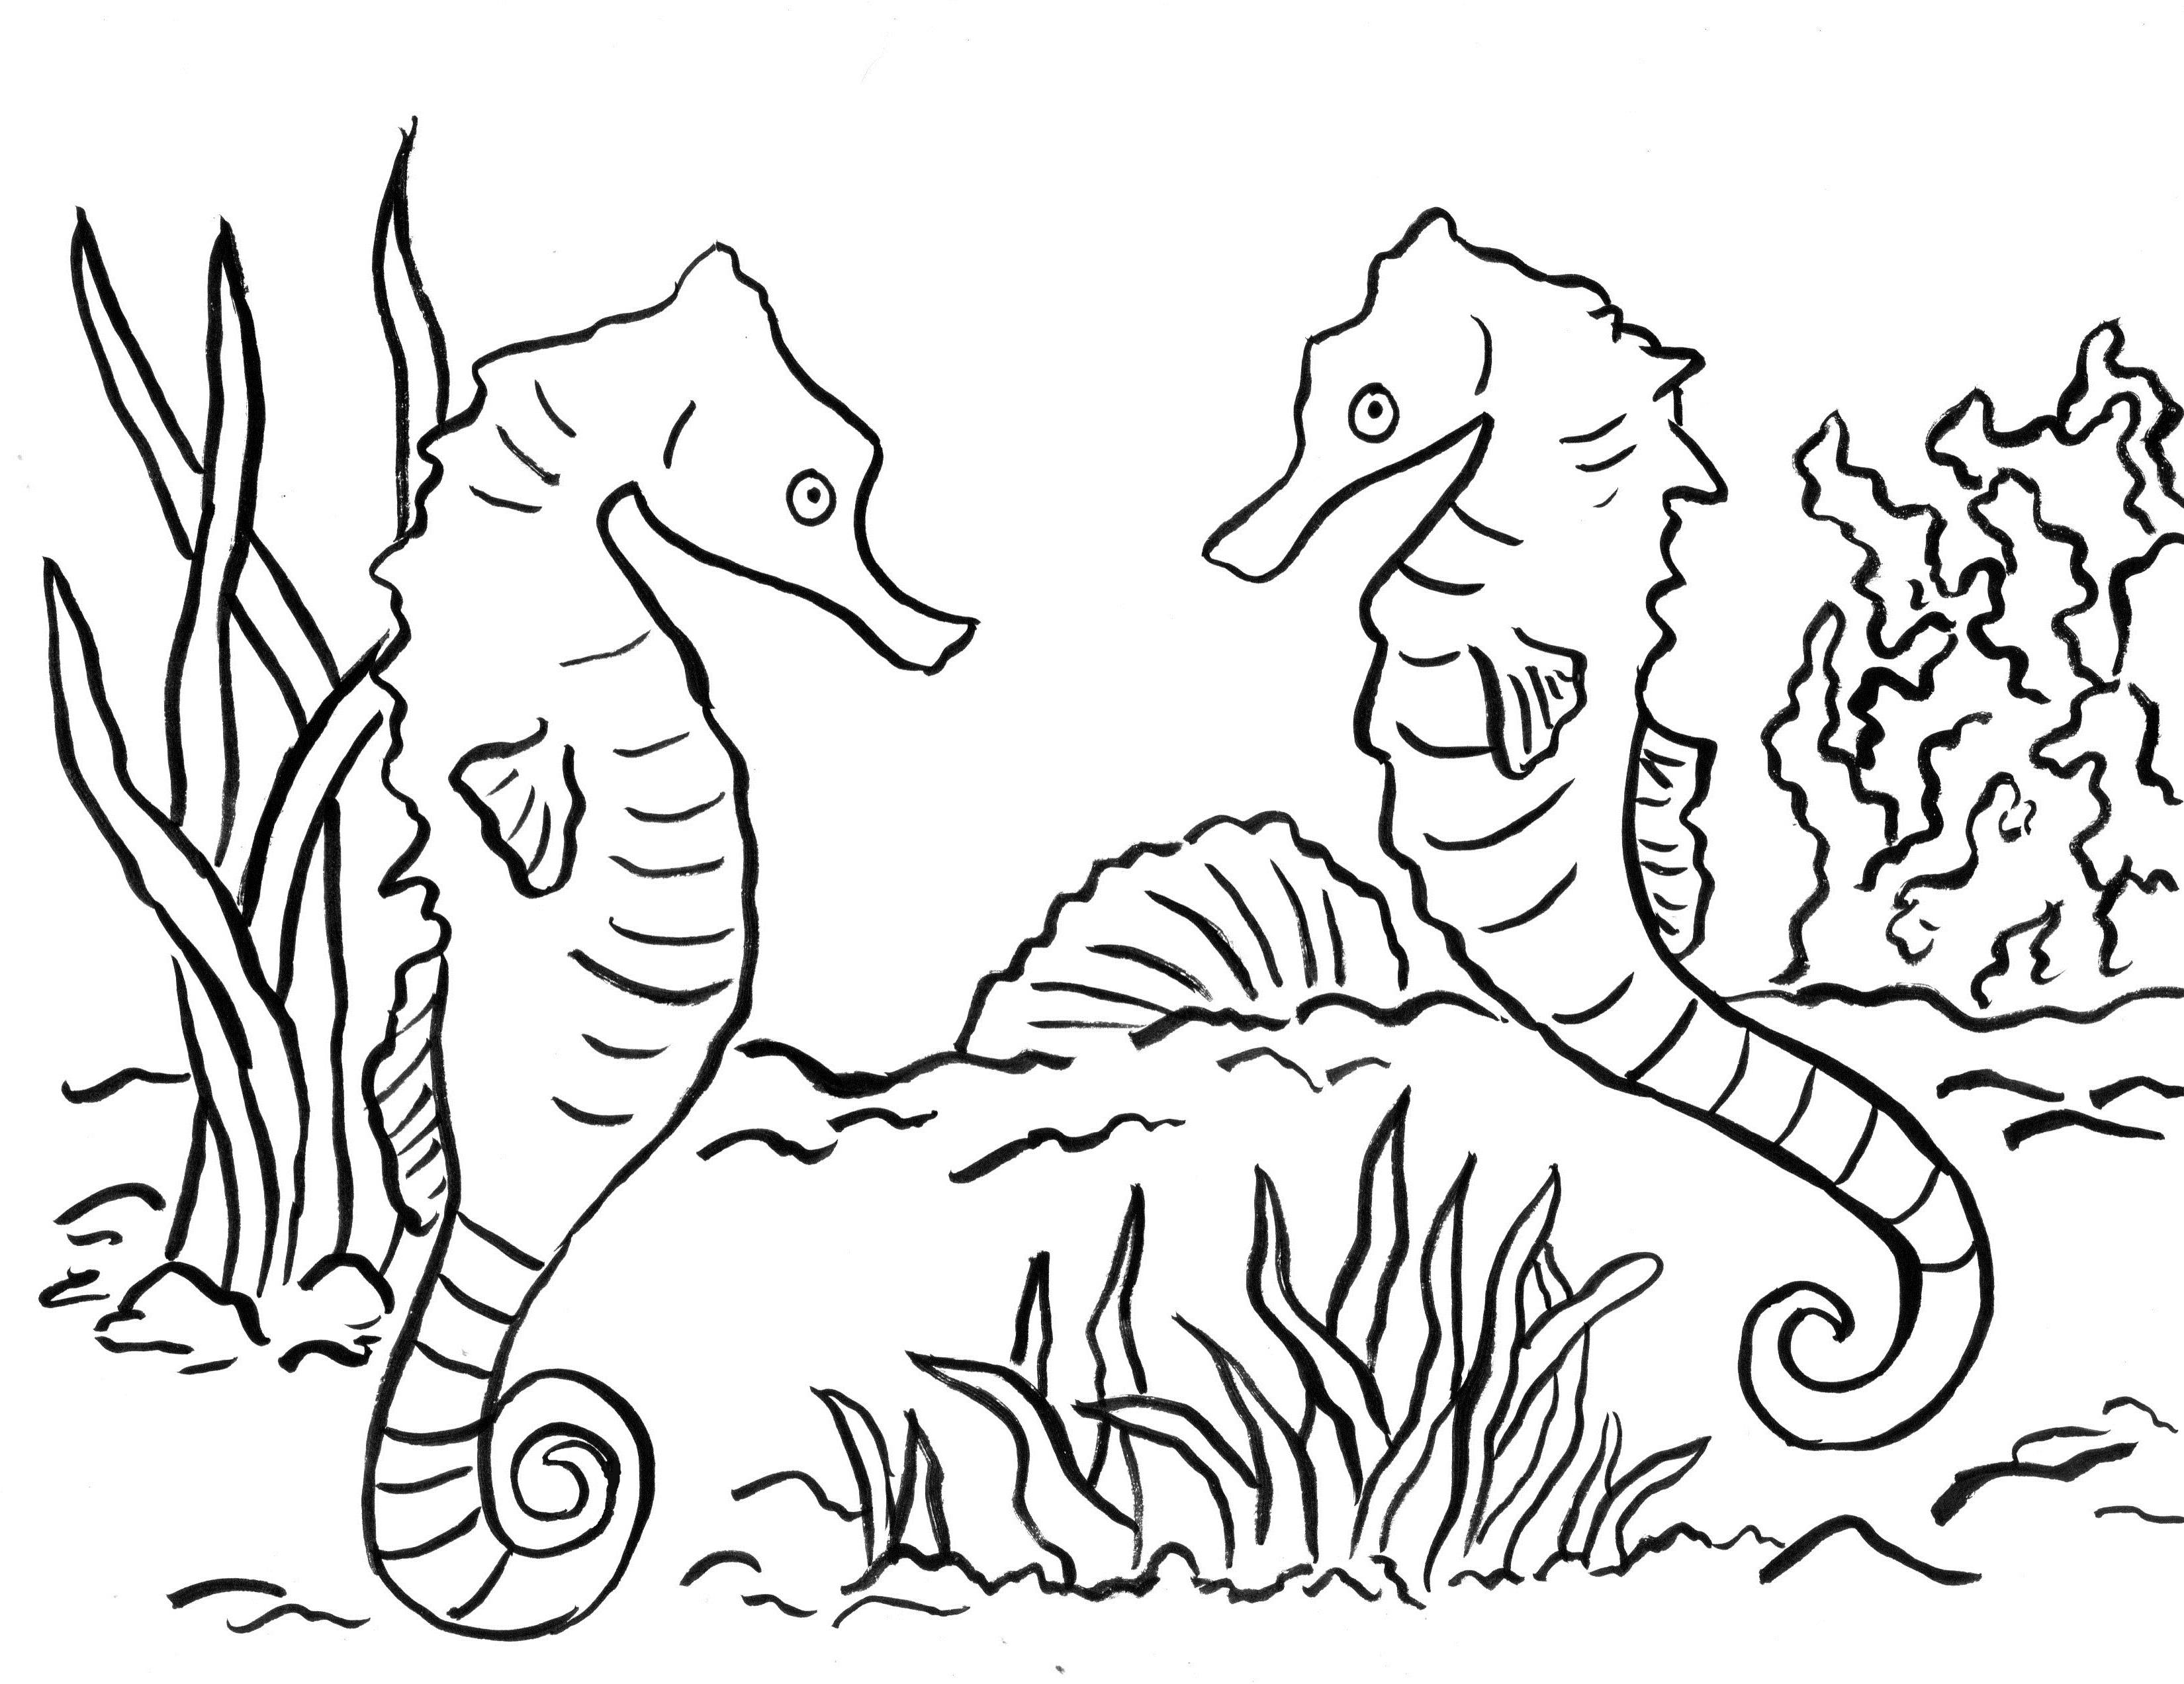 Seahorse Coloring Page - Art Starts for Kids